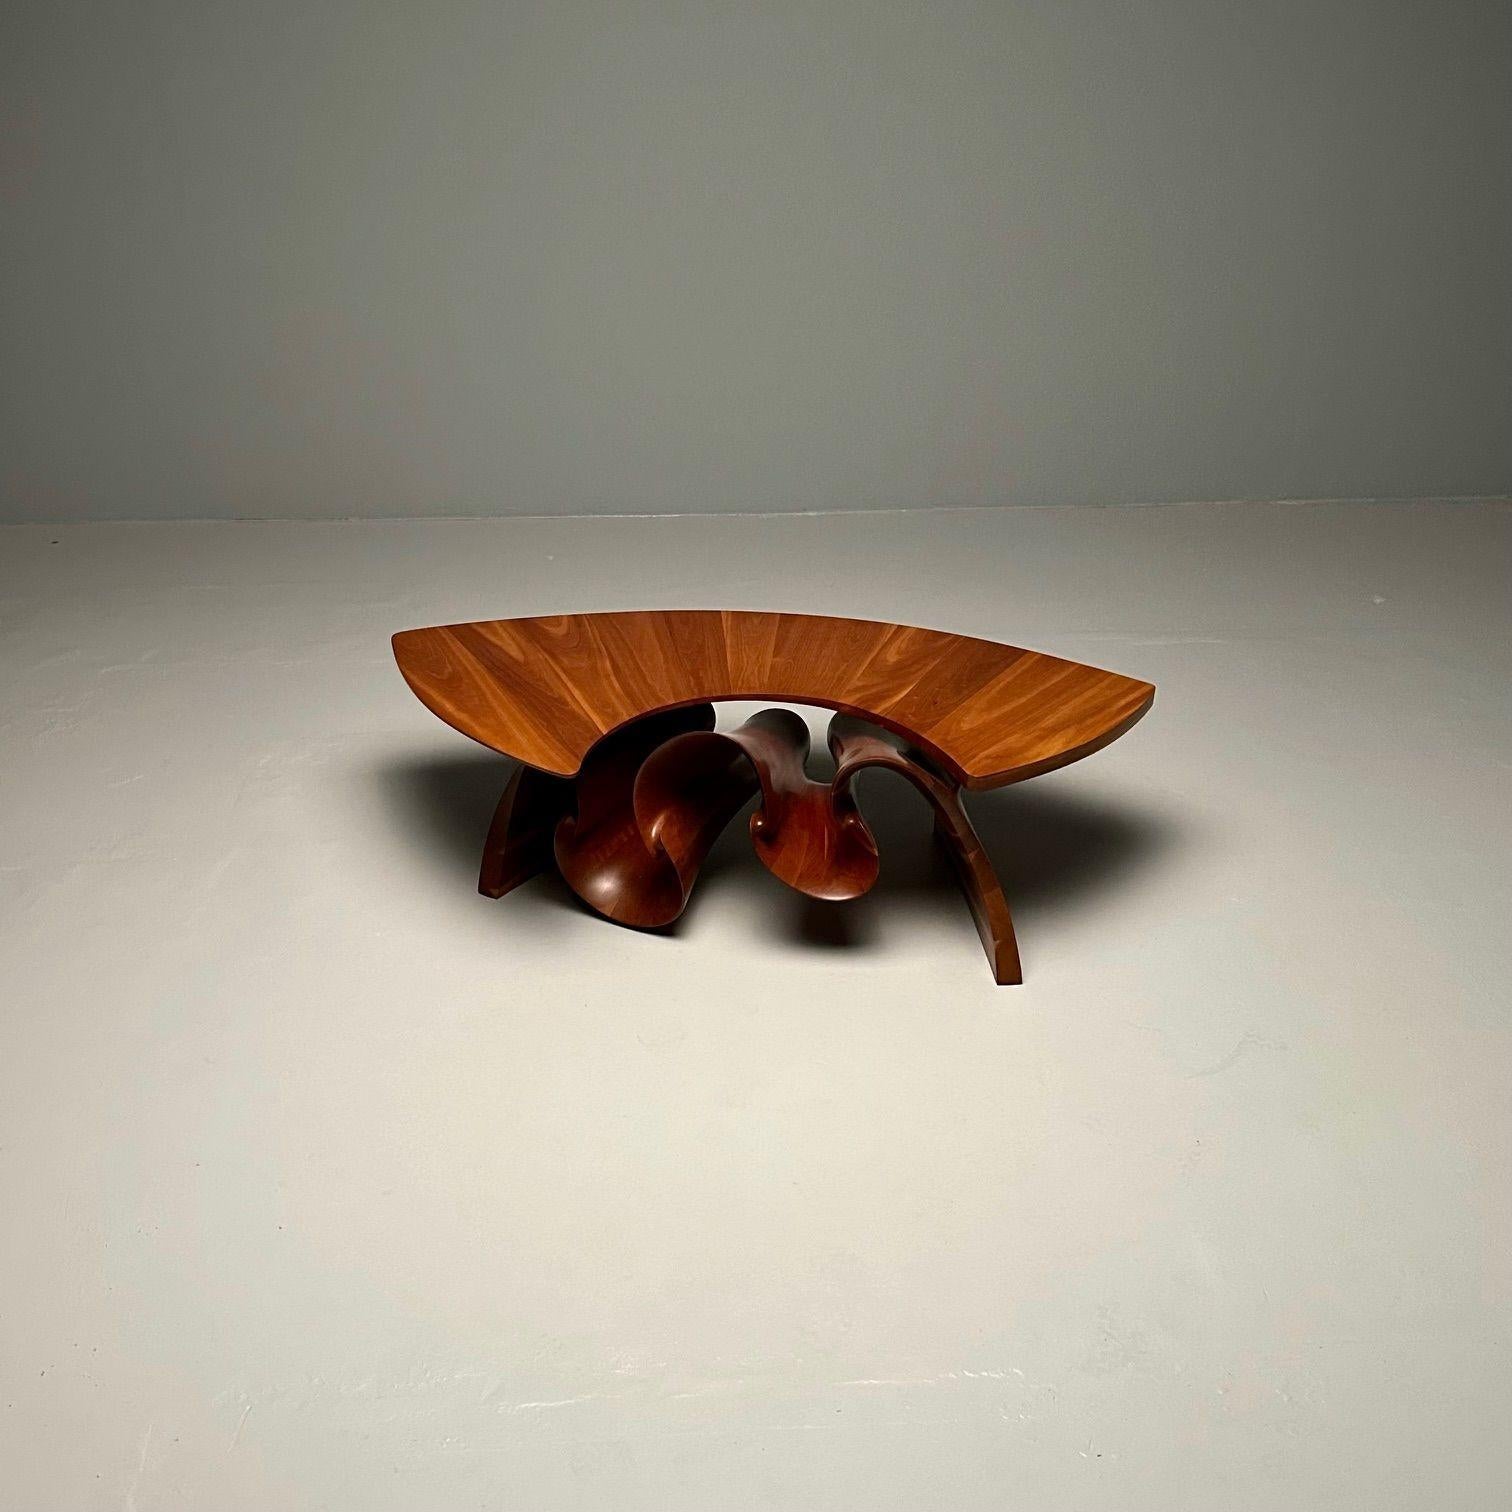 Peter Michael Adams, Mid-Century, Sculptural Coffee Table, Walnut, USA, 1970s For Sale 6